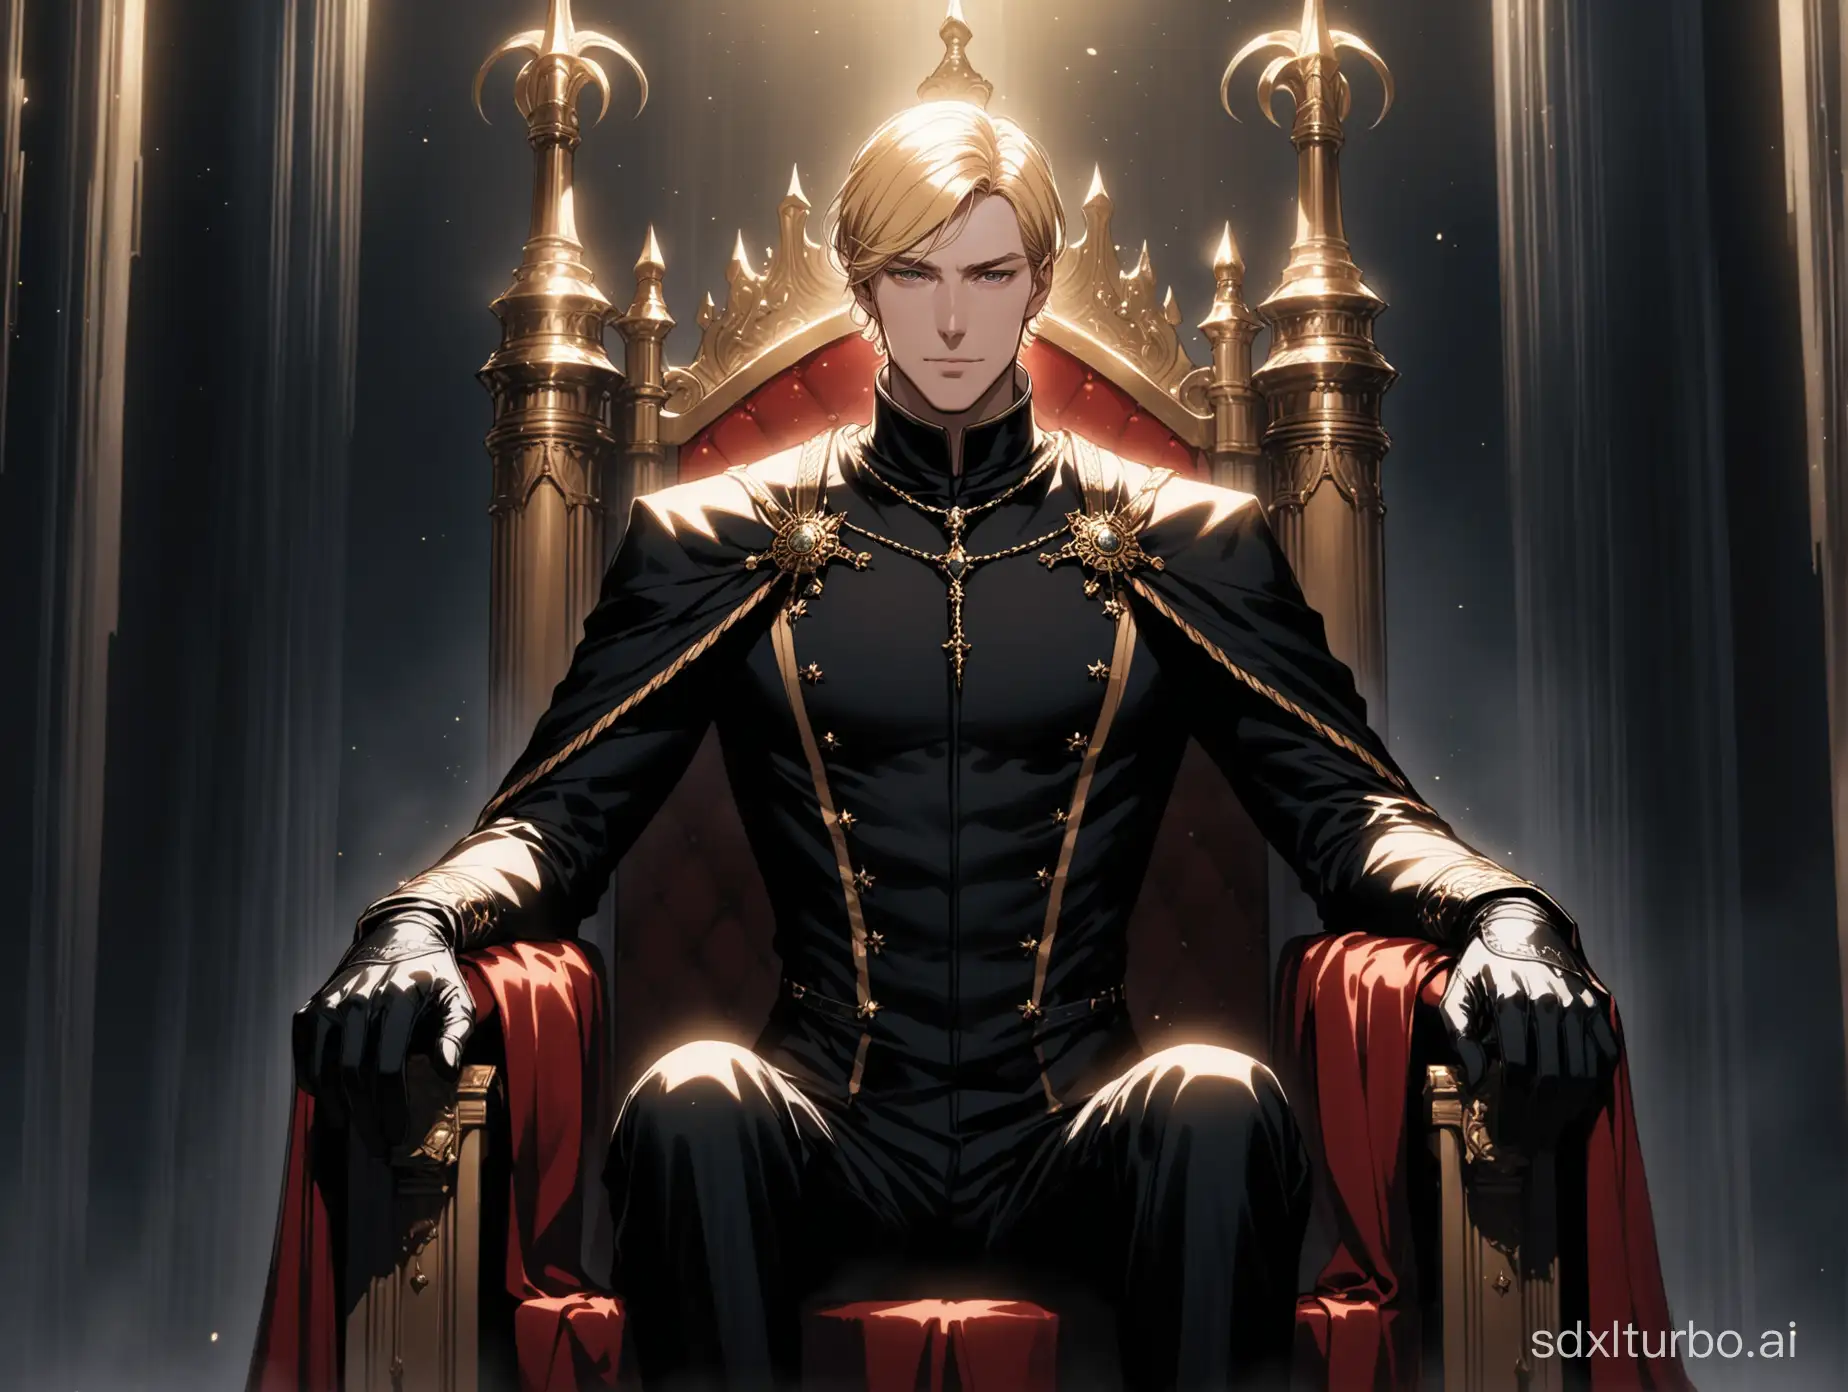 Regal-Tall-Man-with-Short-Blond-Hair-Wearing-Black-Gloves-on-Throne